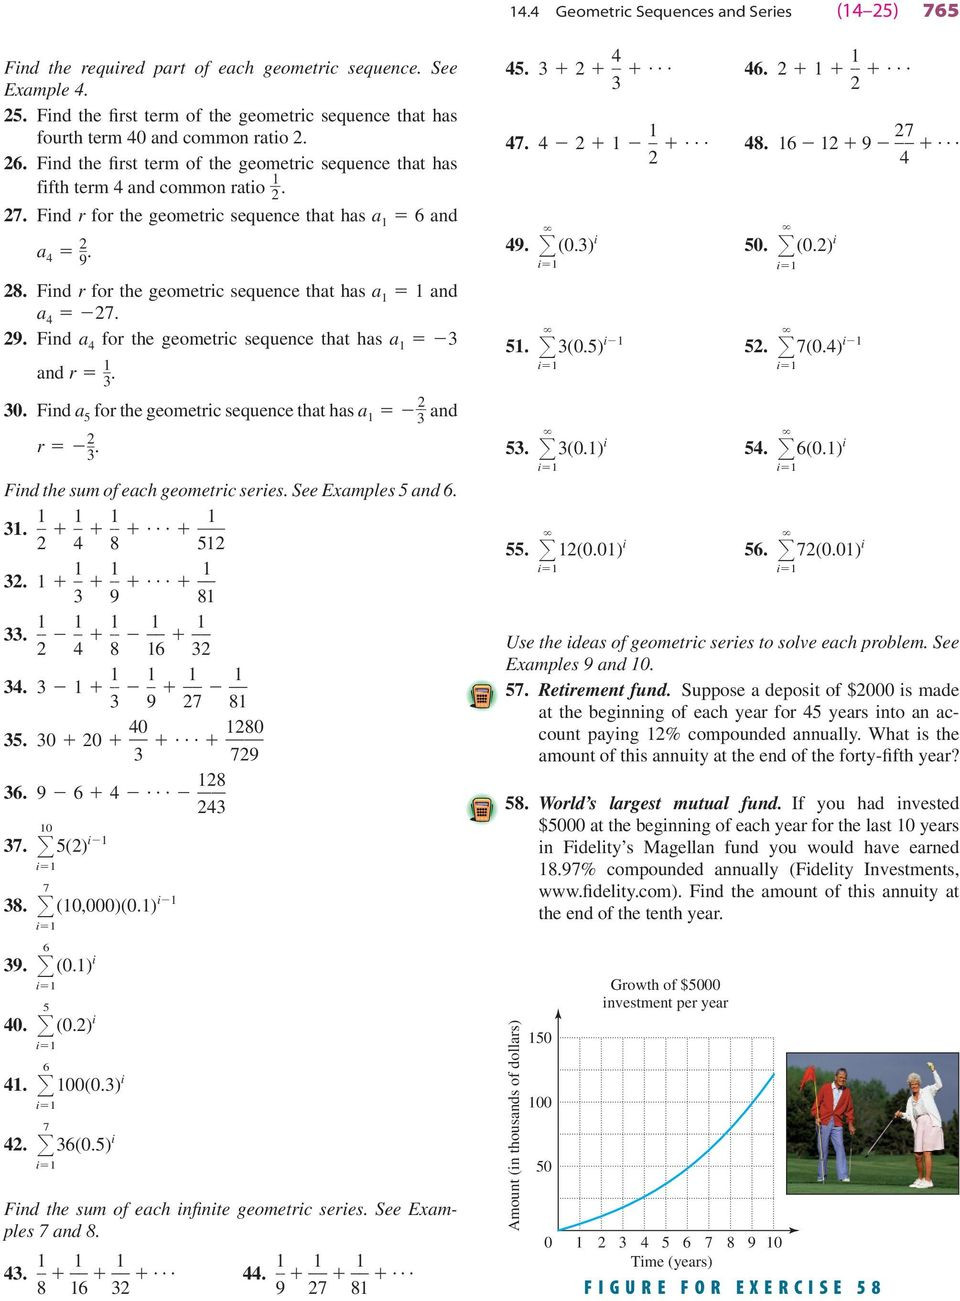 Geometric Sequence and Series Worksheet Geometric Sequences and Series Pdf Free Download